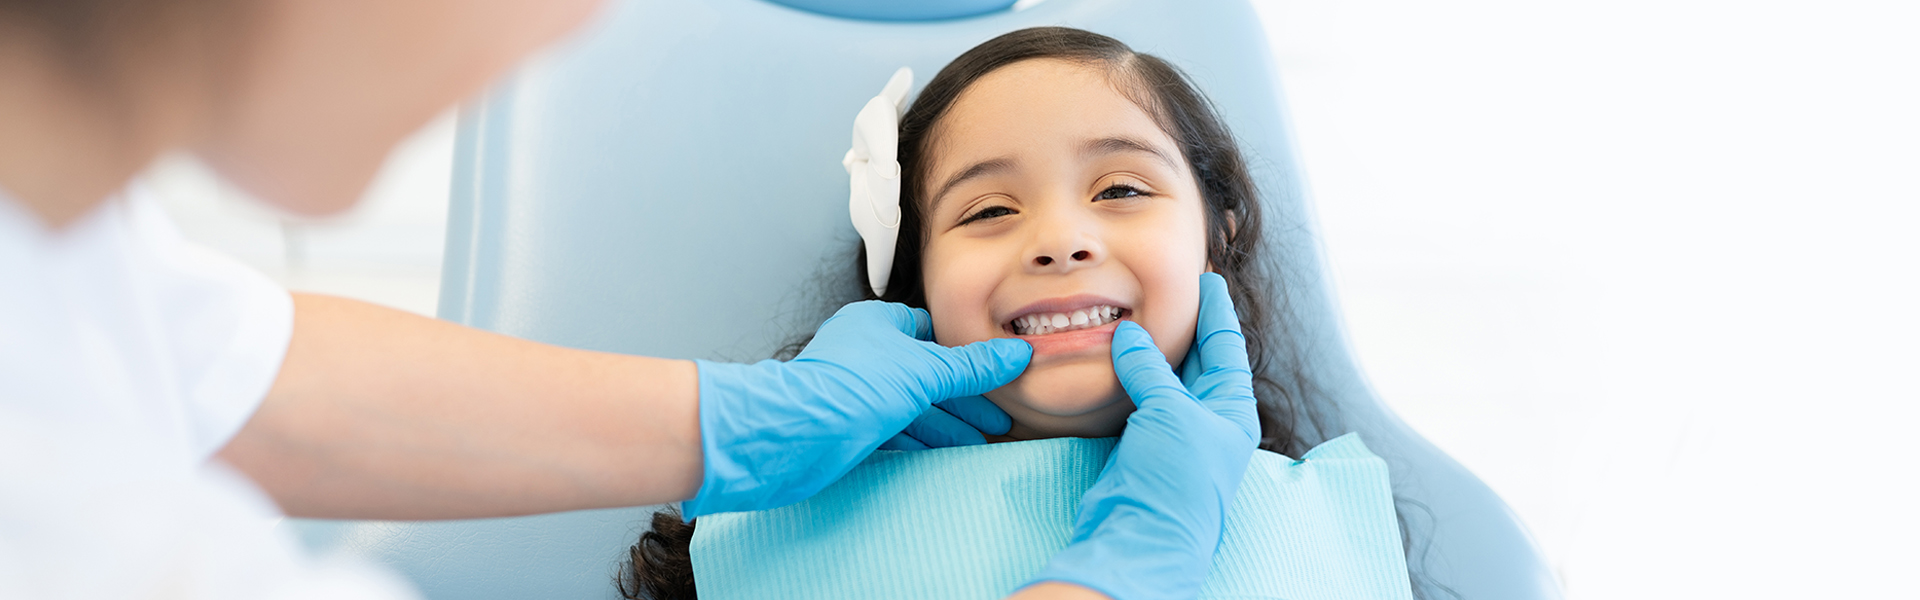 When Should an Infant Get a Frenectomy?